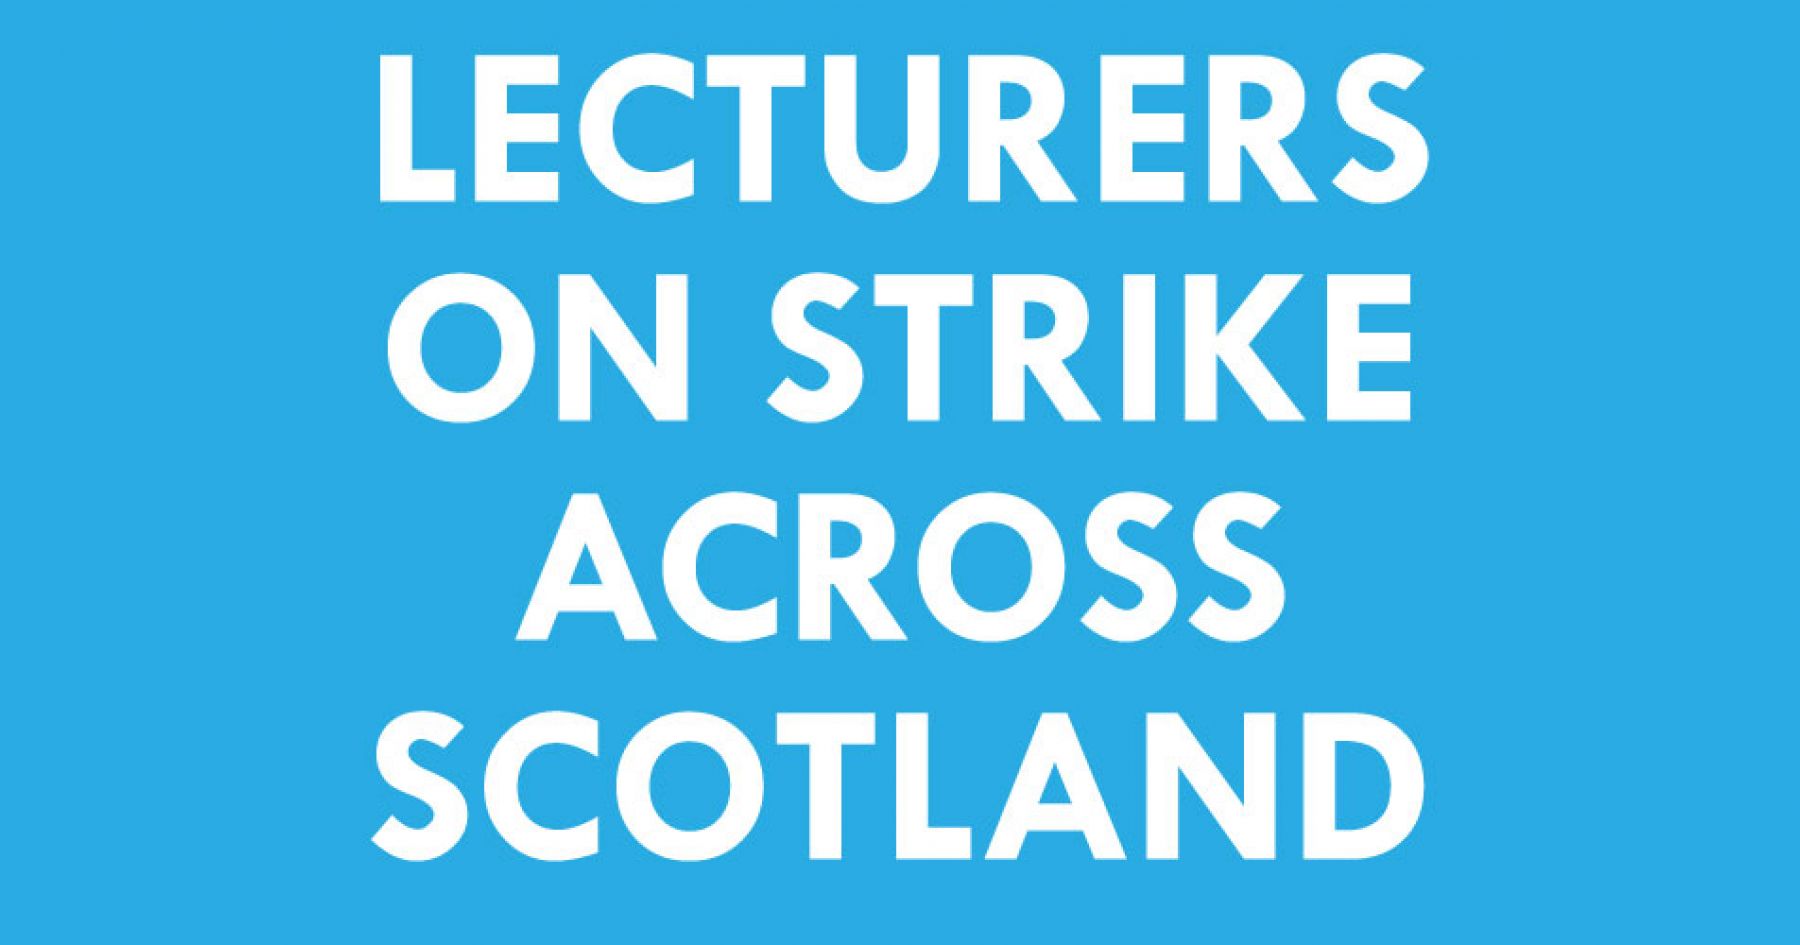 Lecturers on strike across Scotland